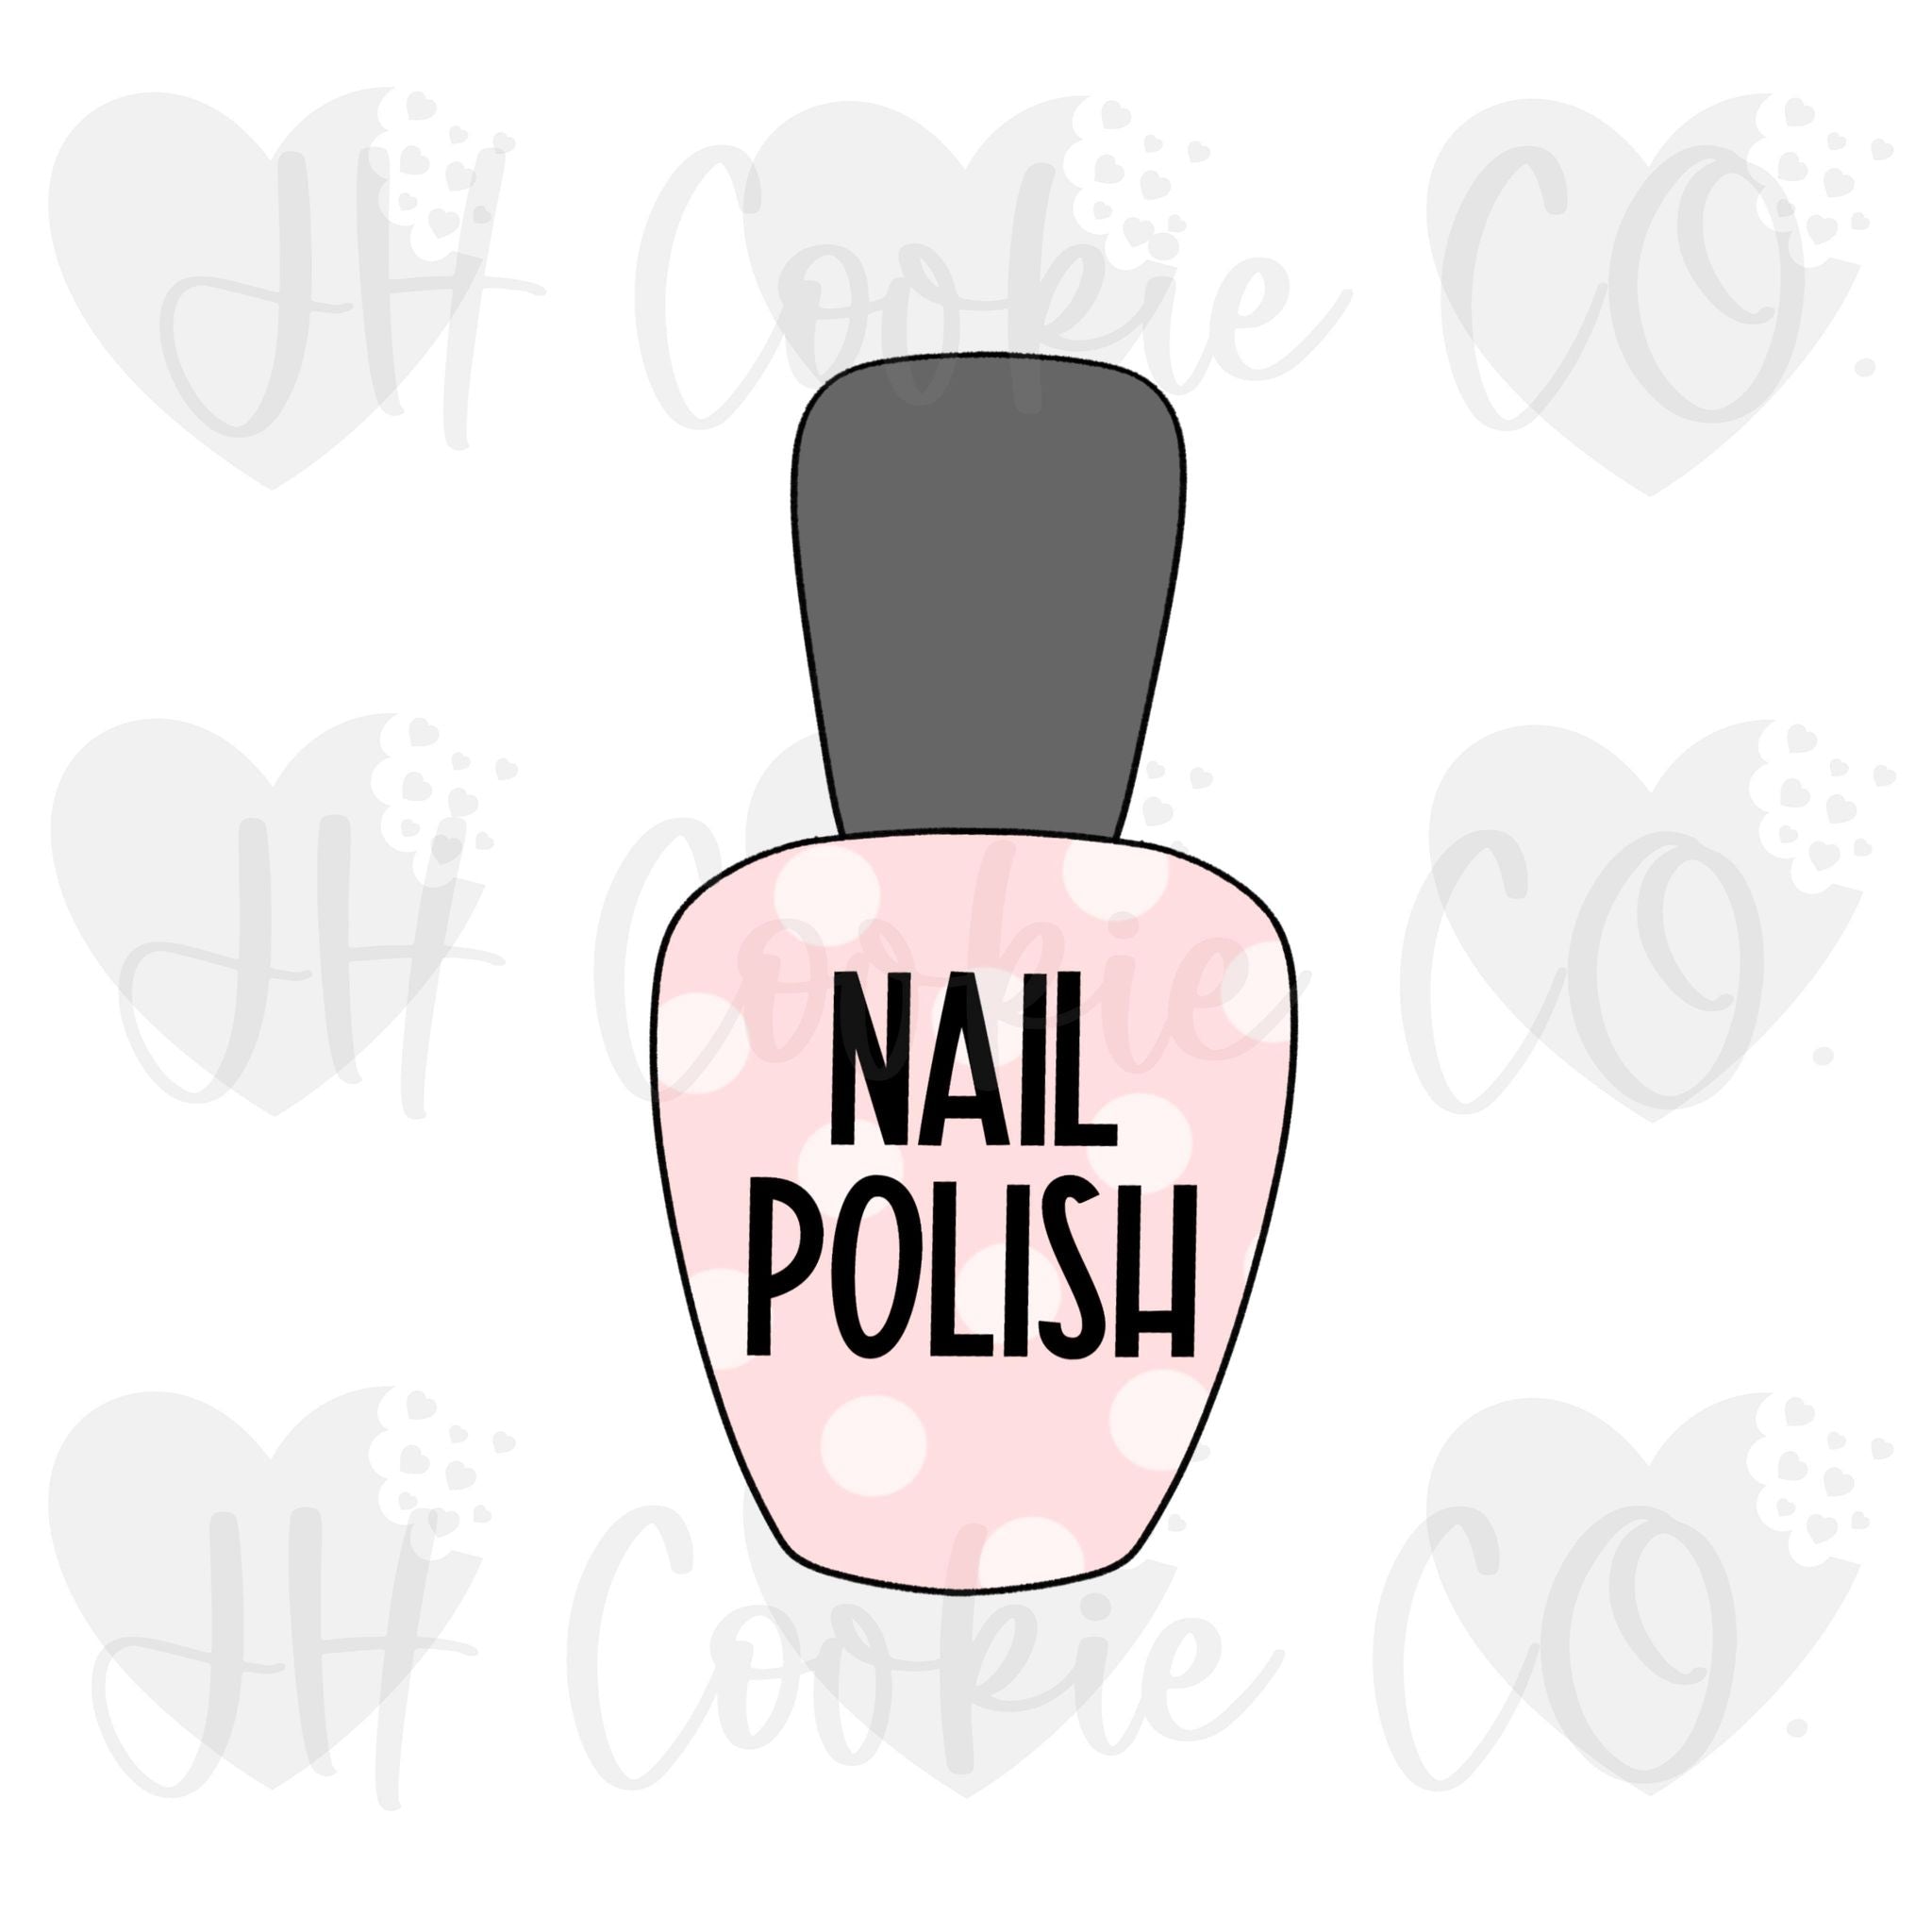 Manicure and makeup studio logo set with spilled nail polish - Stock Image  - Everypixel